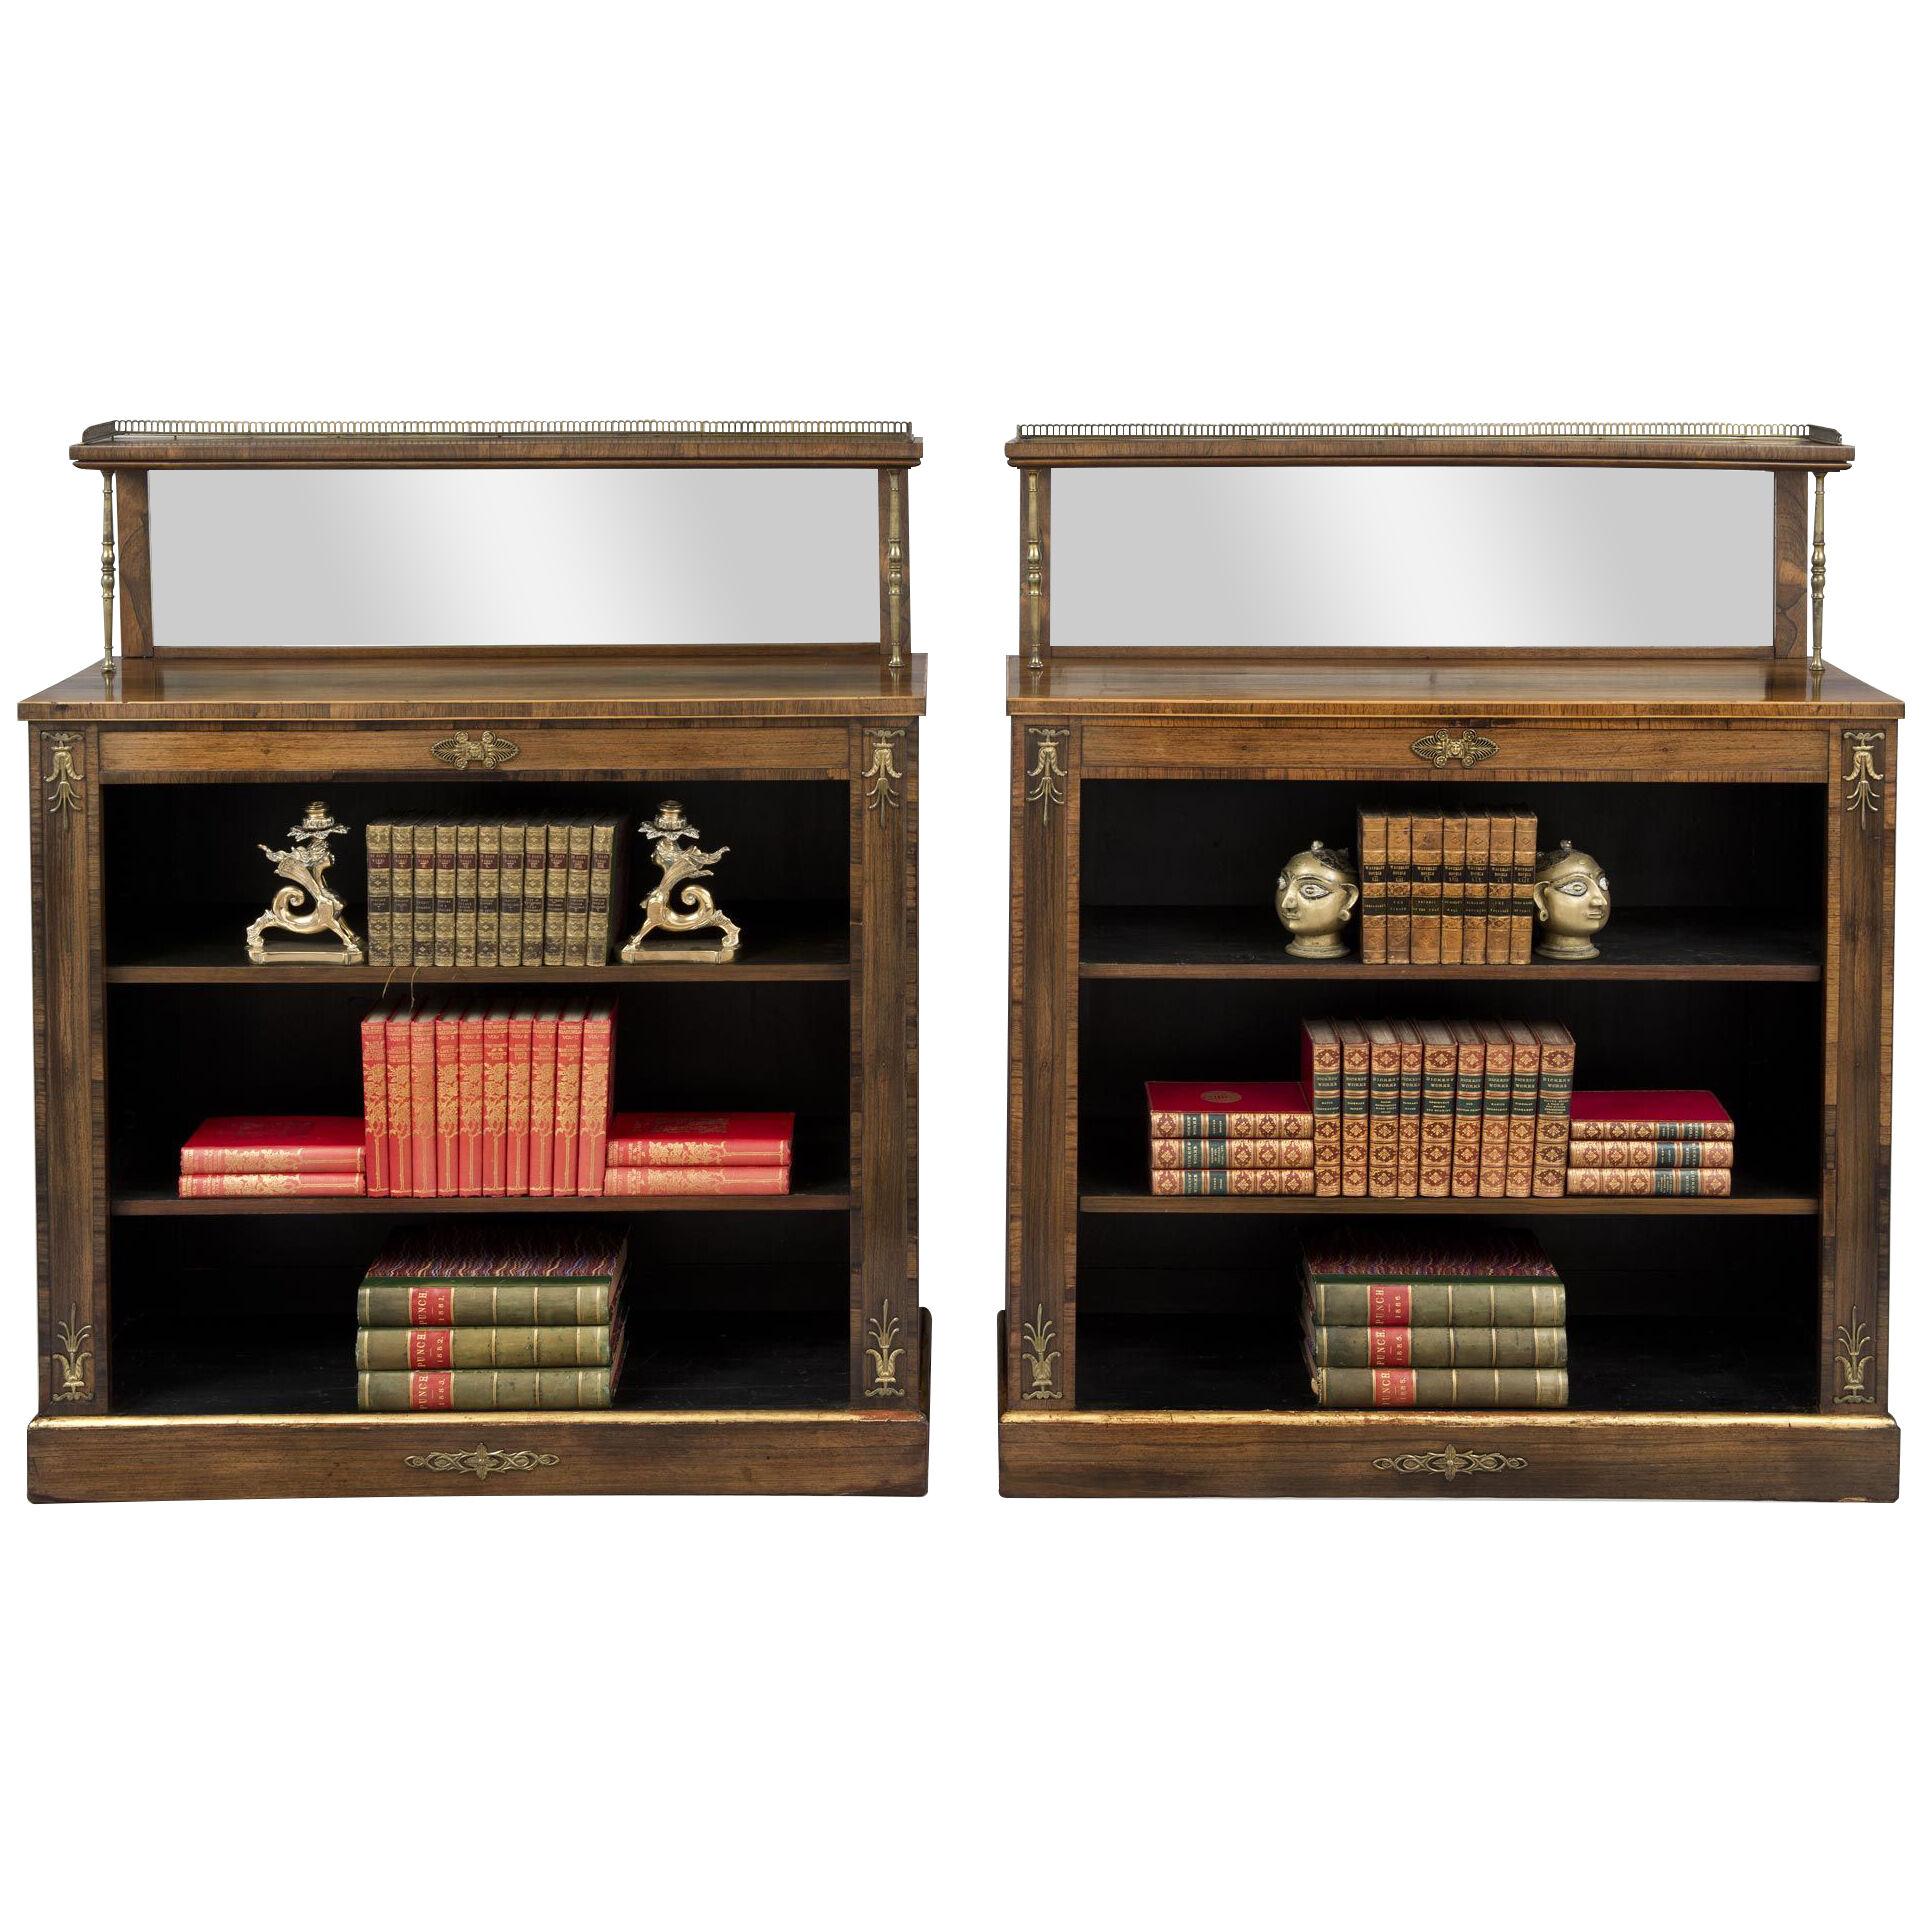 Regency Period Rosewood Bookcases, English Circa 1820